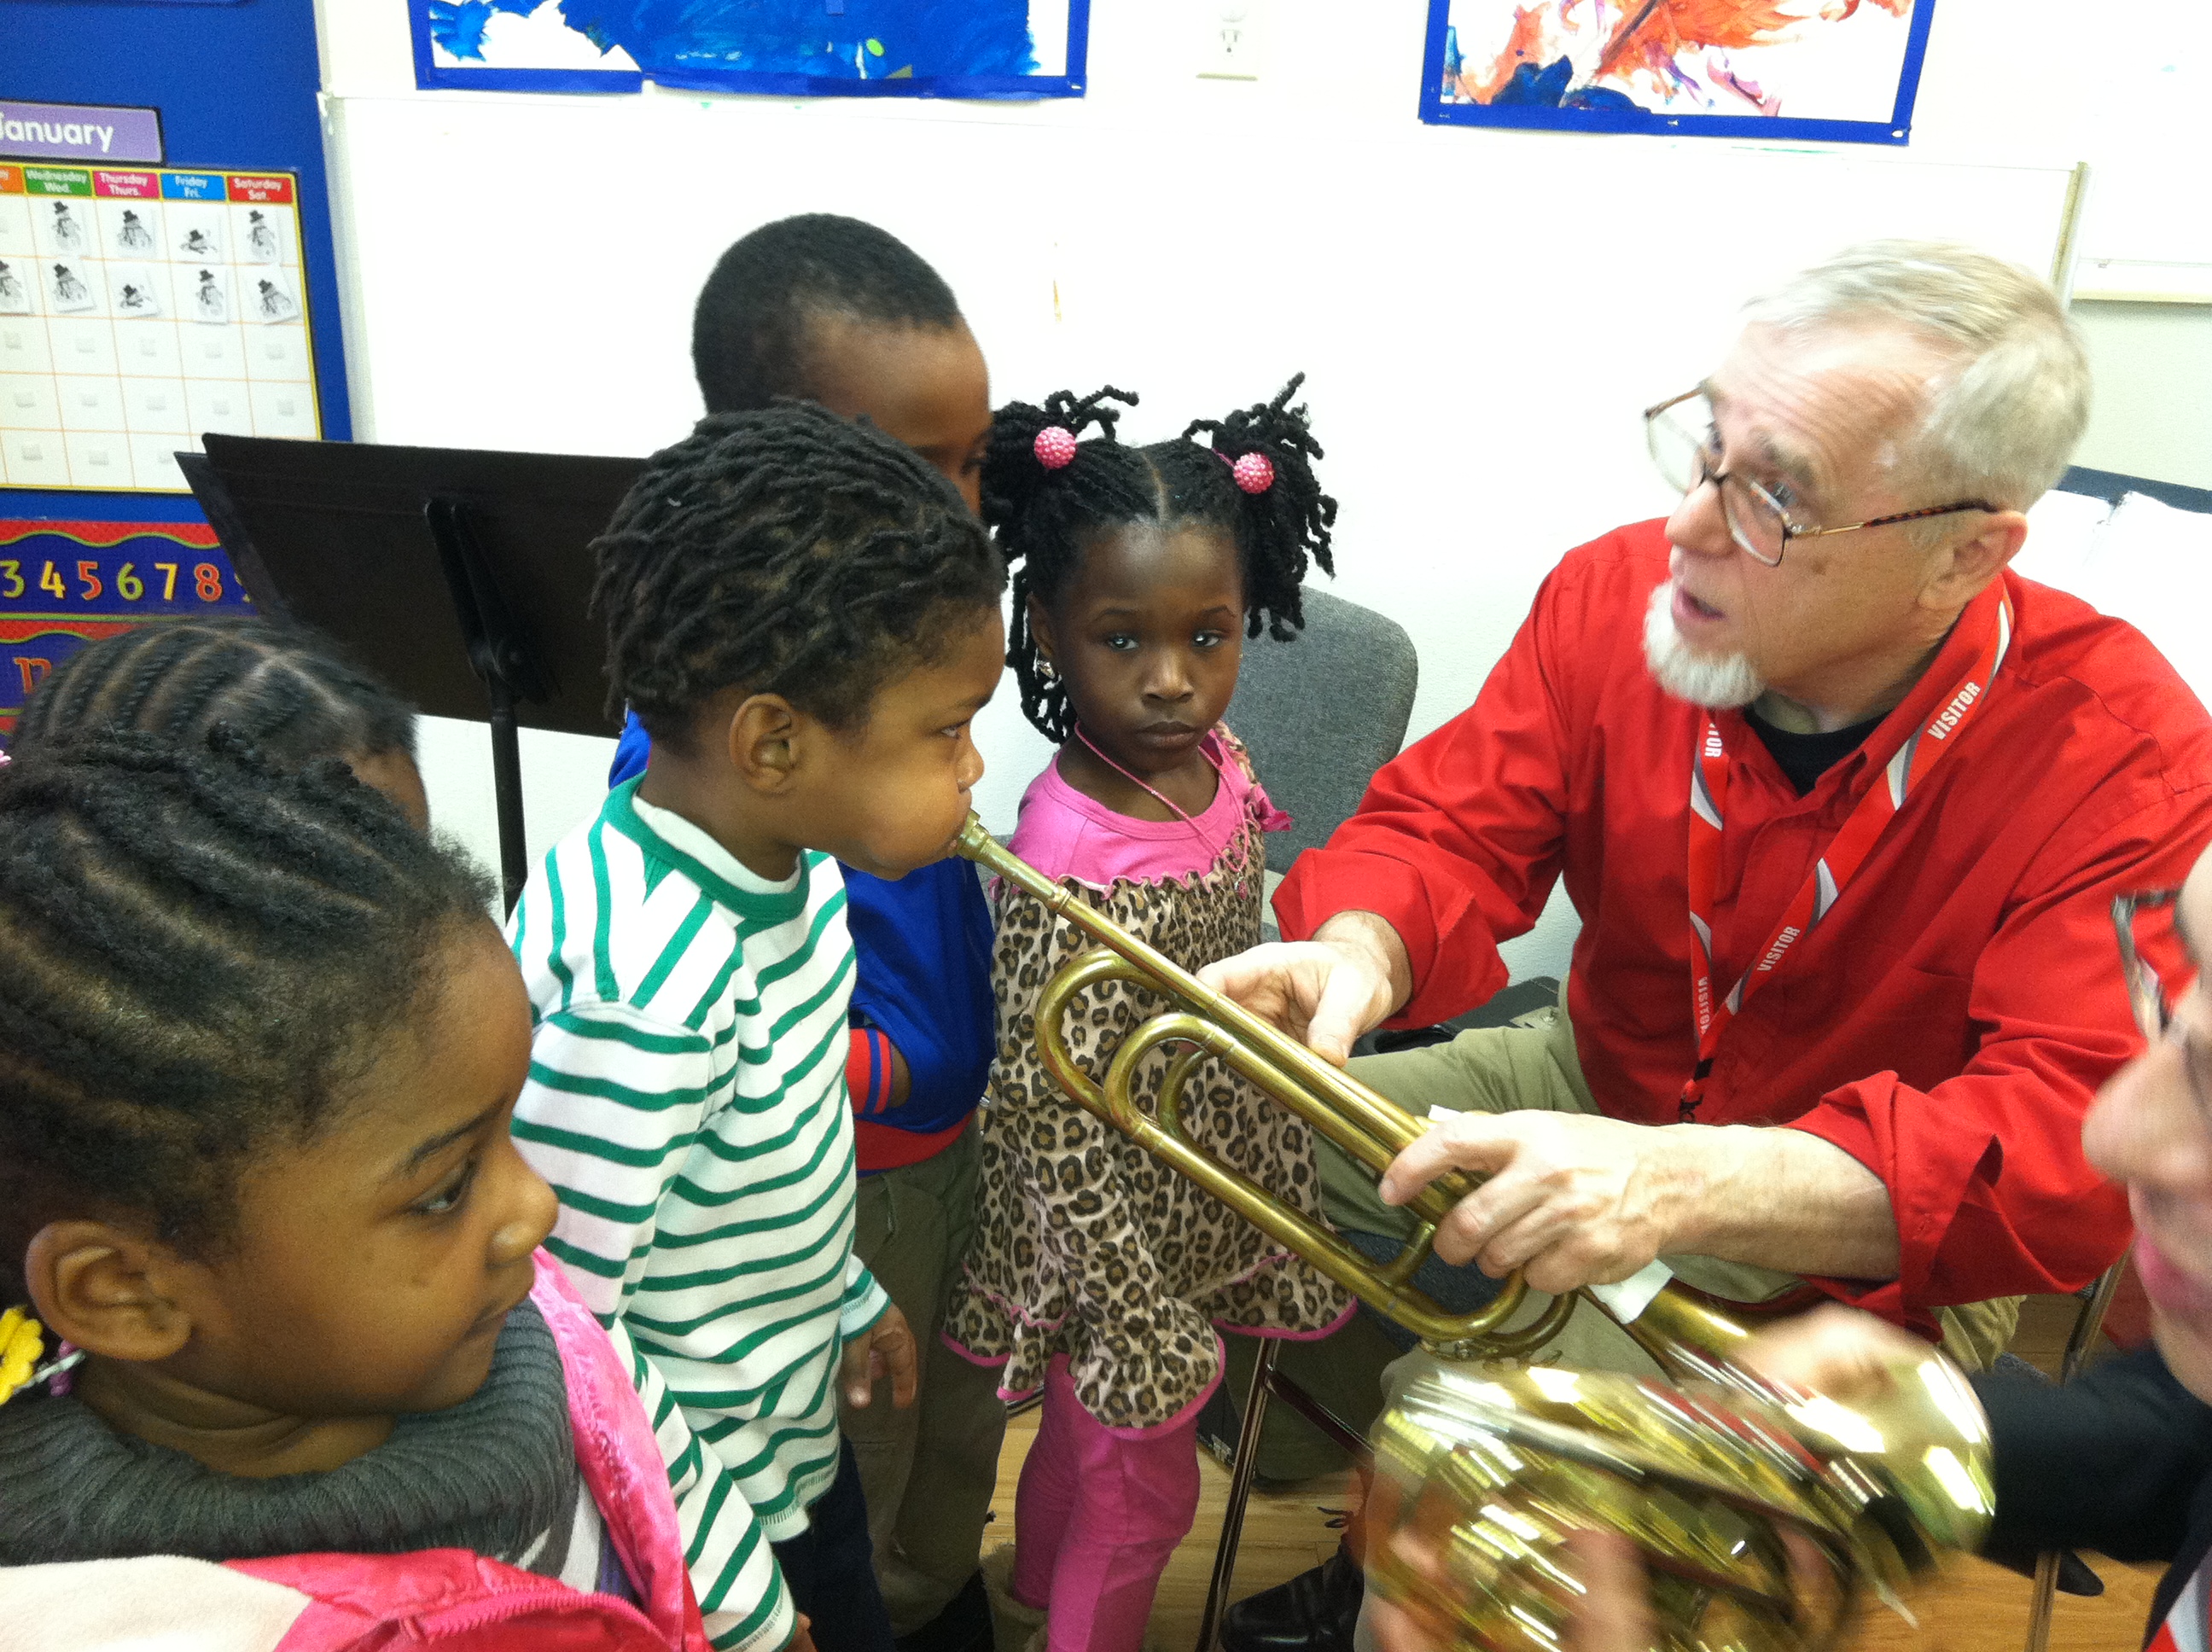 Westminster faculty holds instrument in classroom with young students.